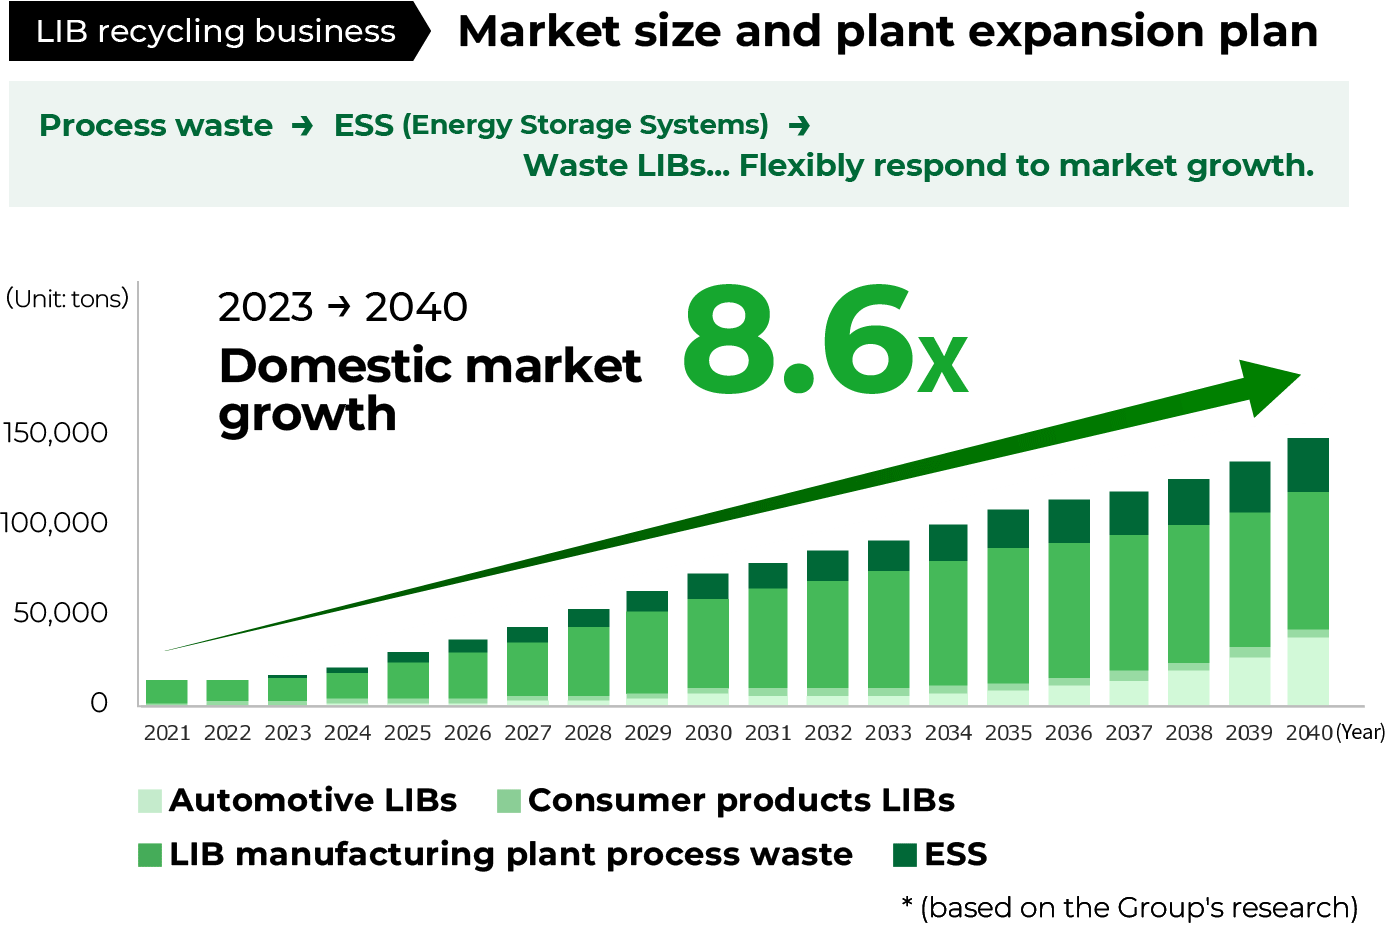 Market size and plant expansion plan